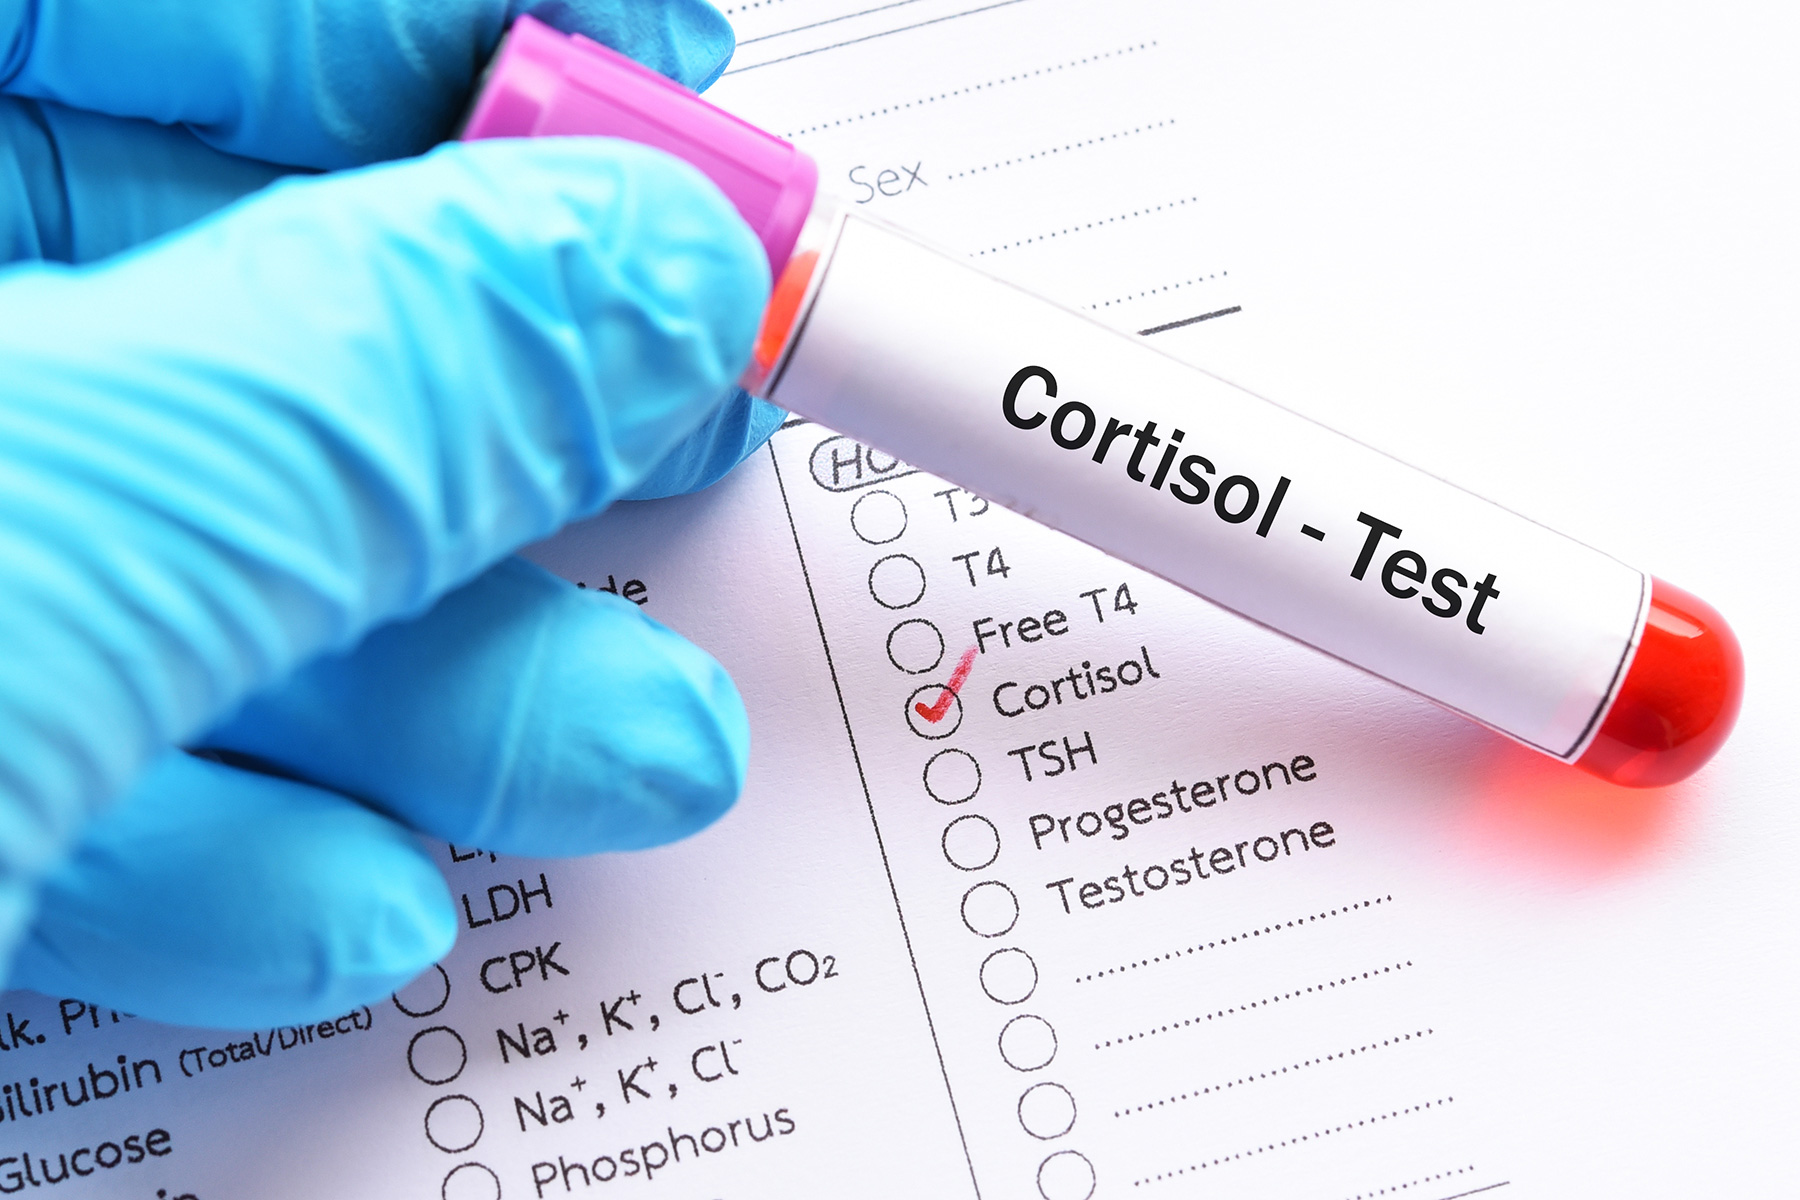 Simple blood tests are used to measure cortisol levels in the blood.